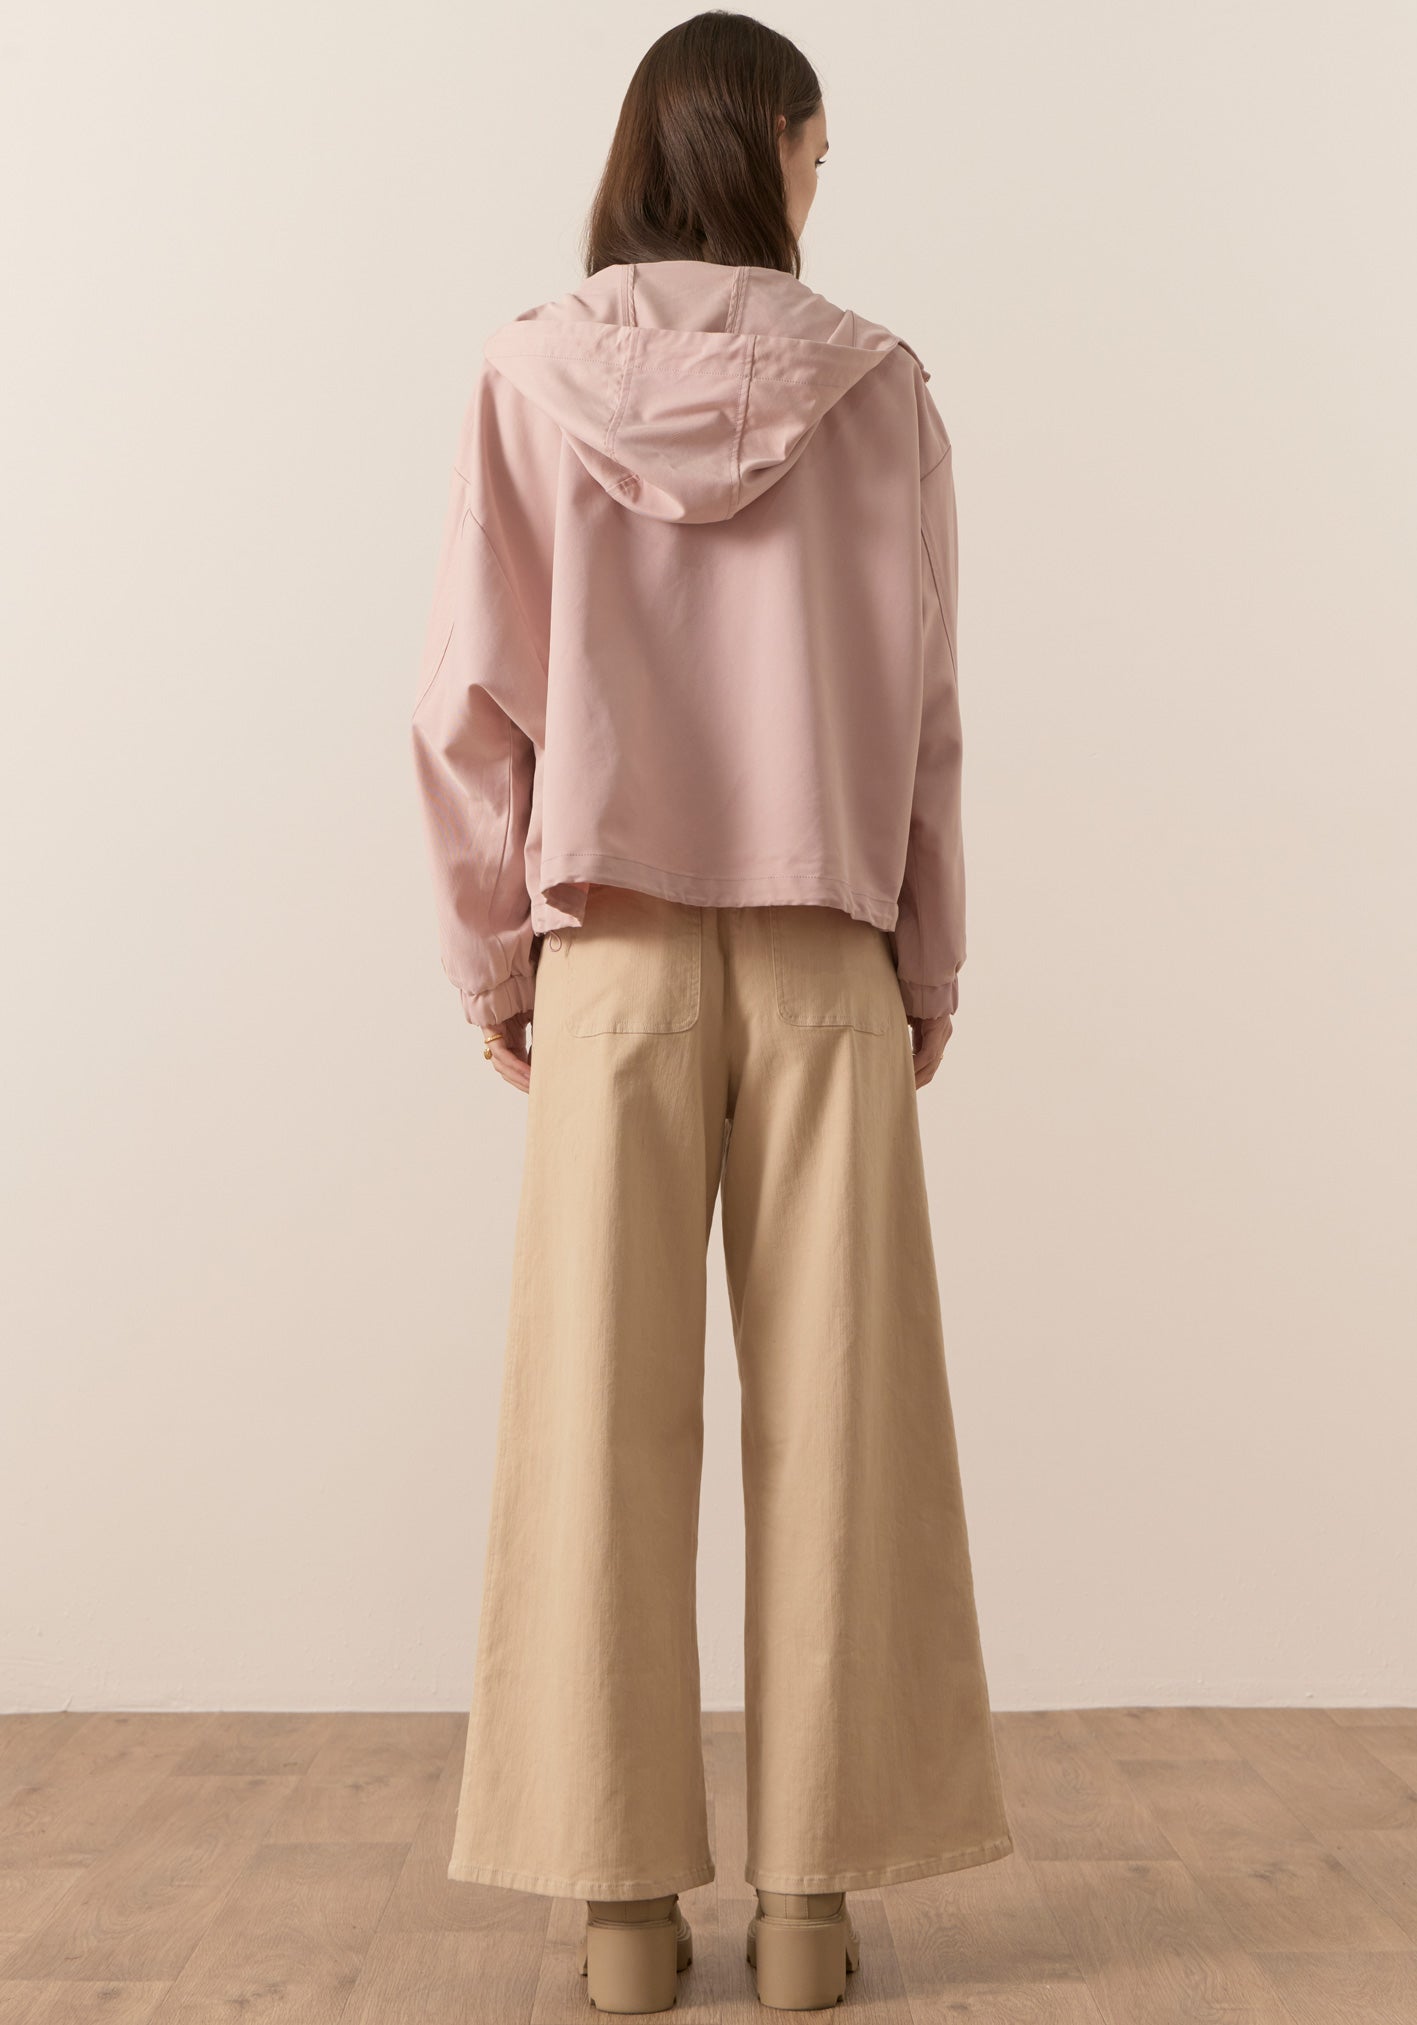 Forster Outdoor Jacket in Blush